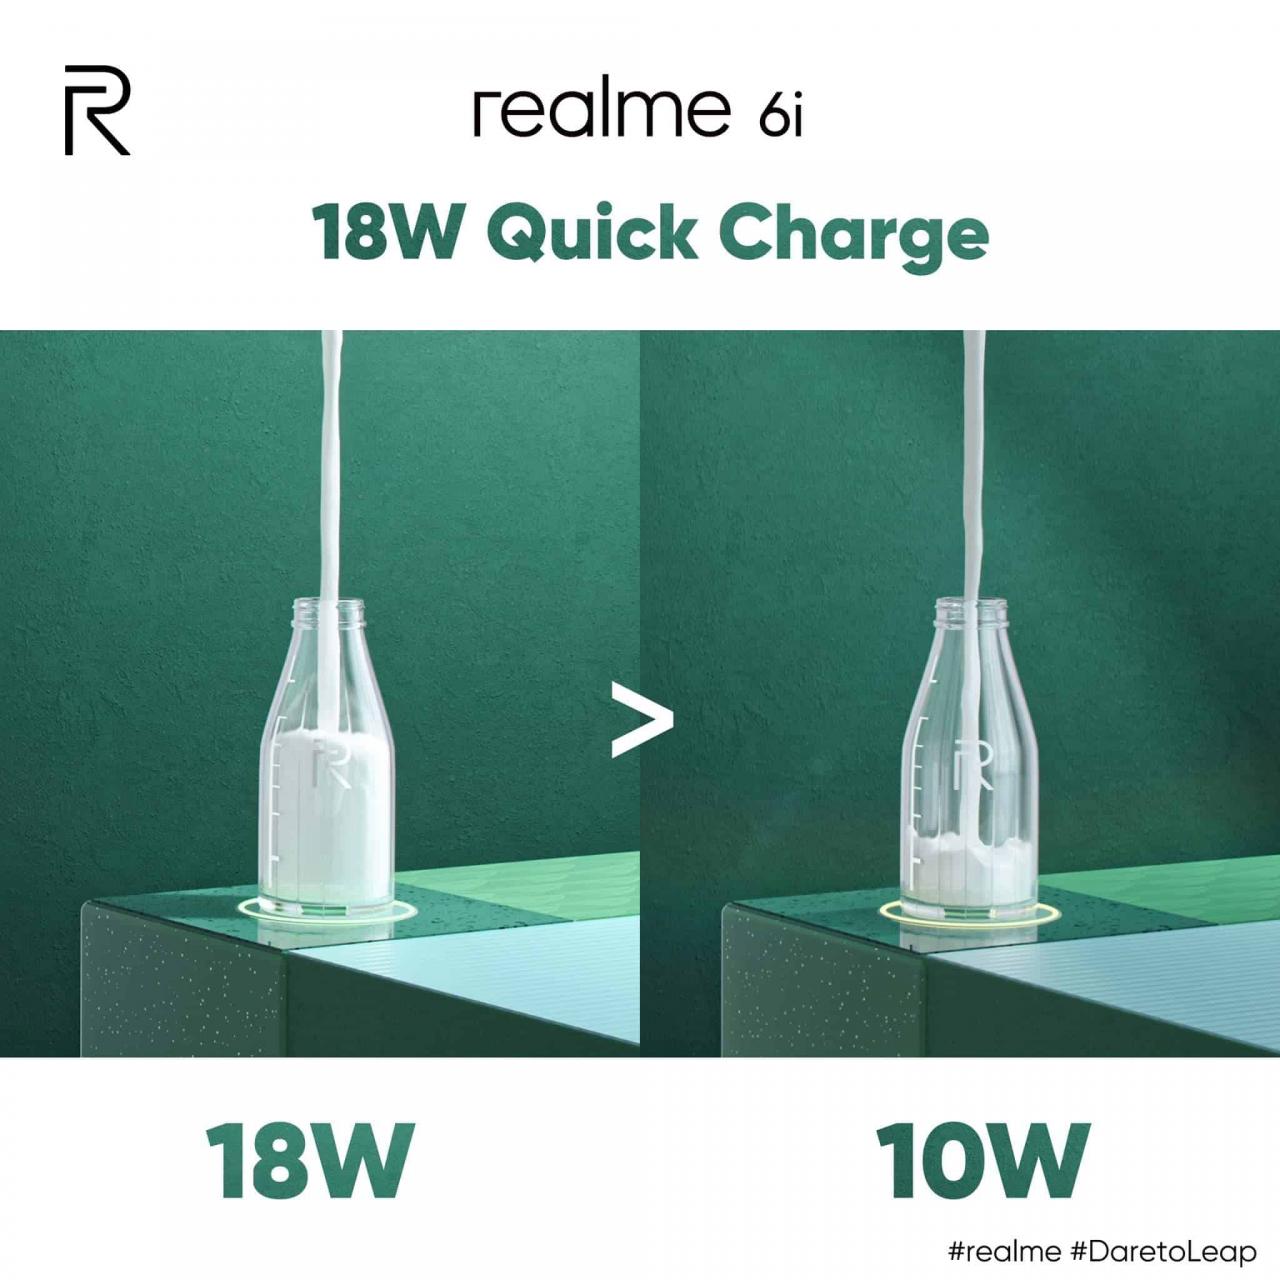 realme 6i quick charge